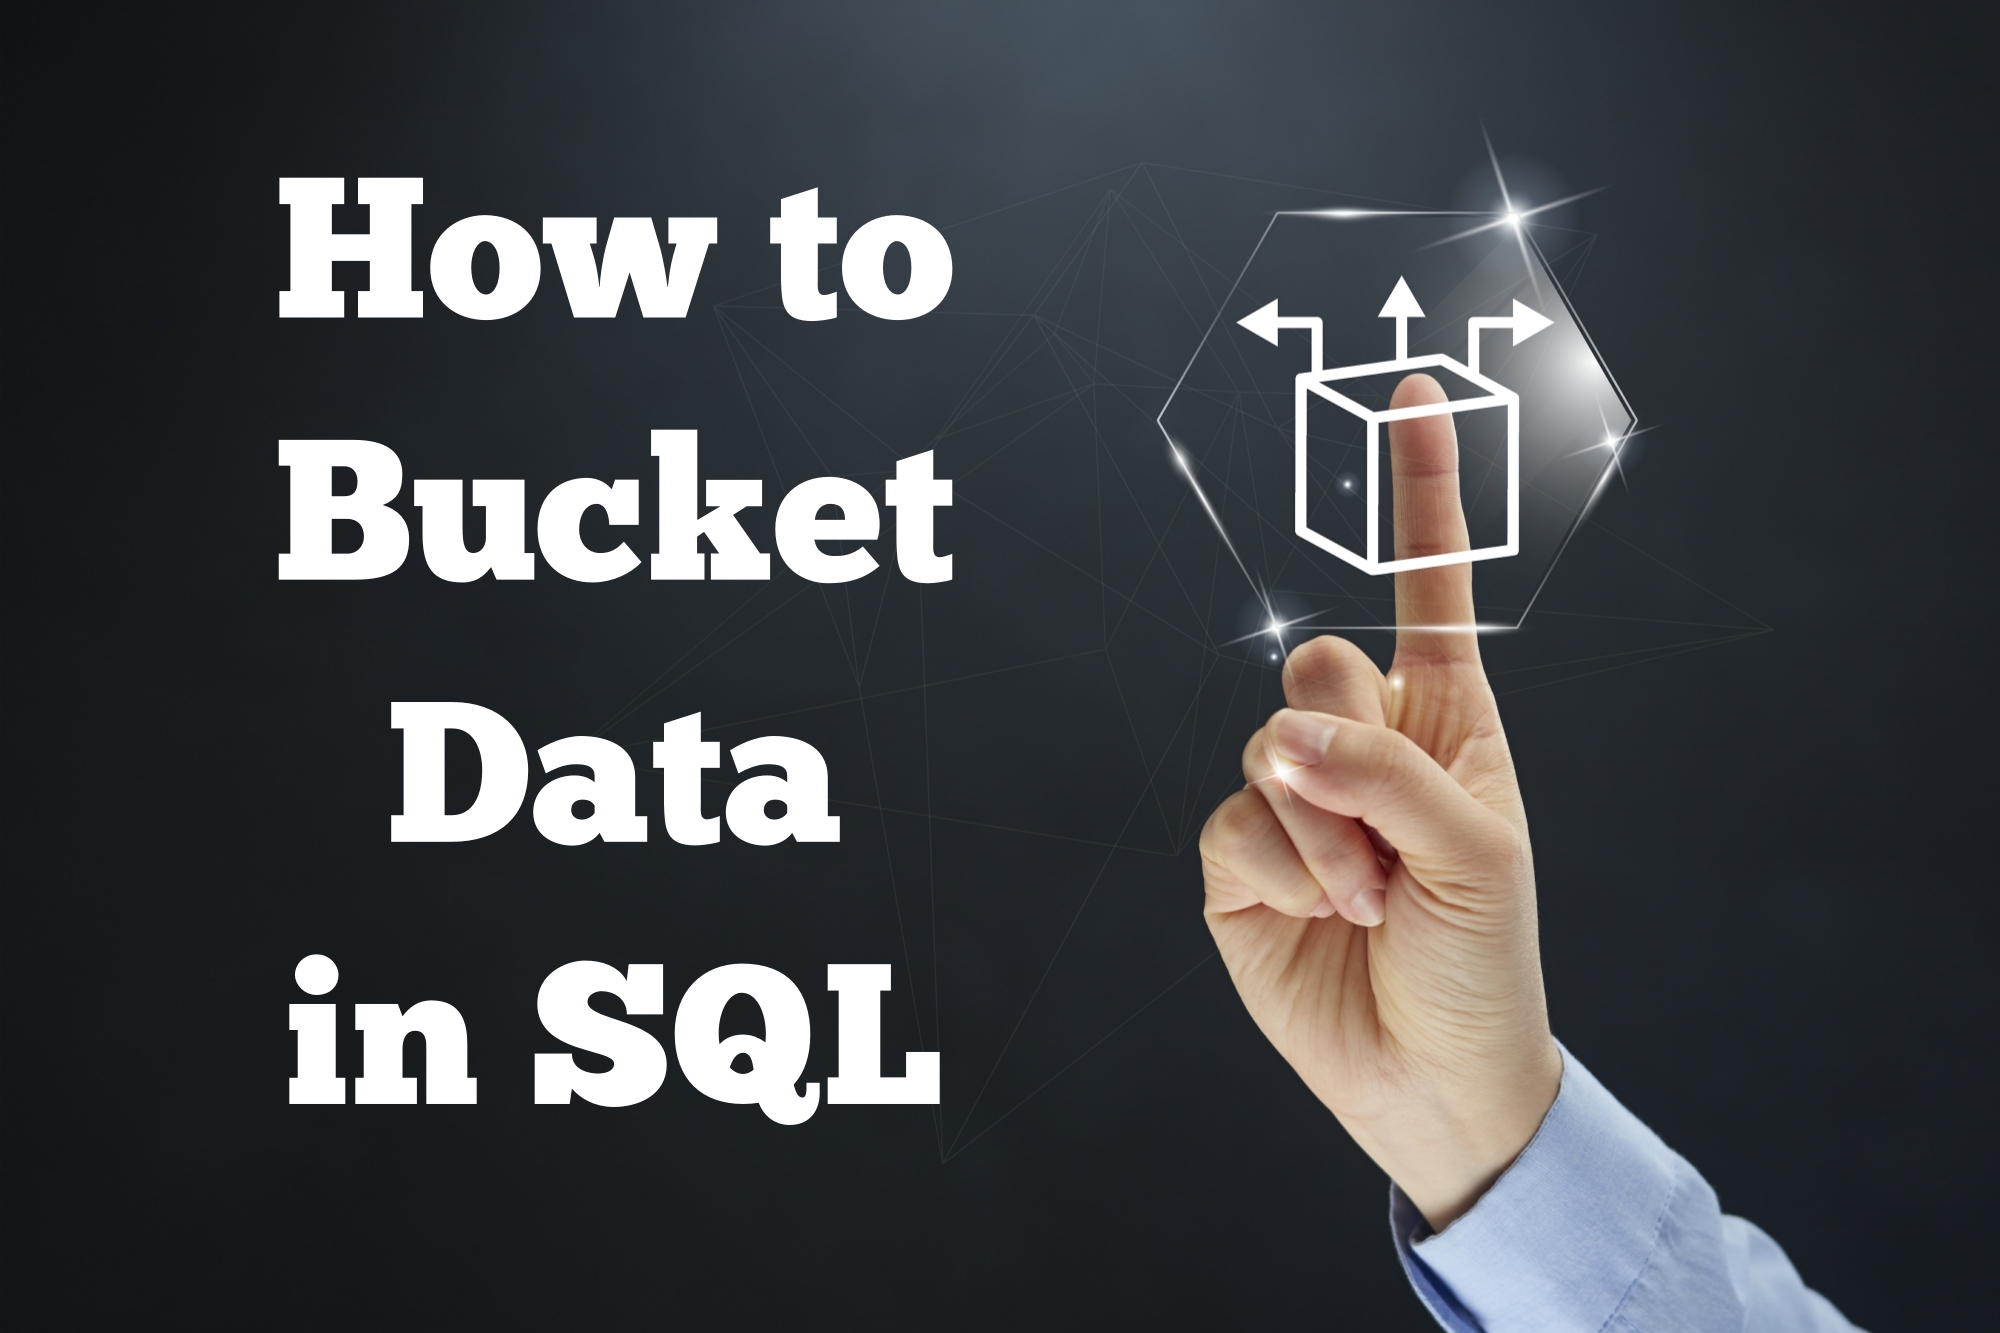 How to Bucket Data in SQL